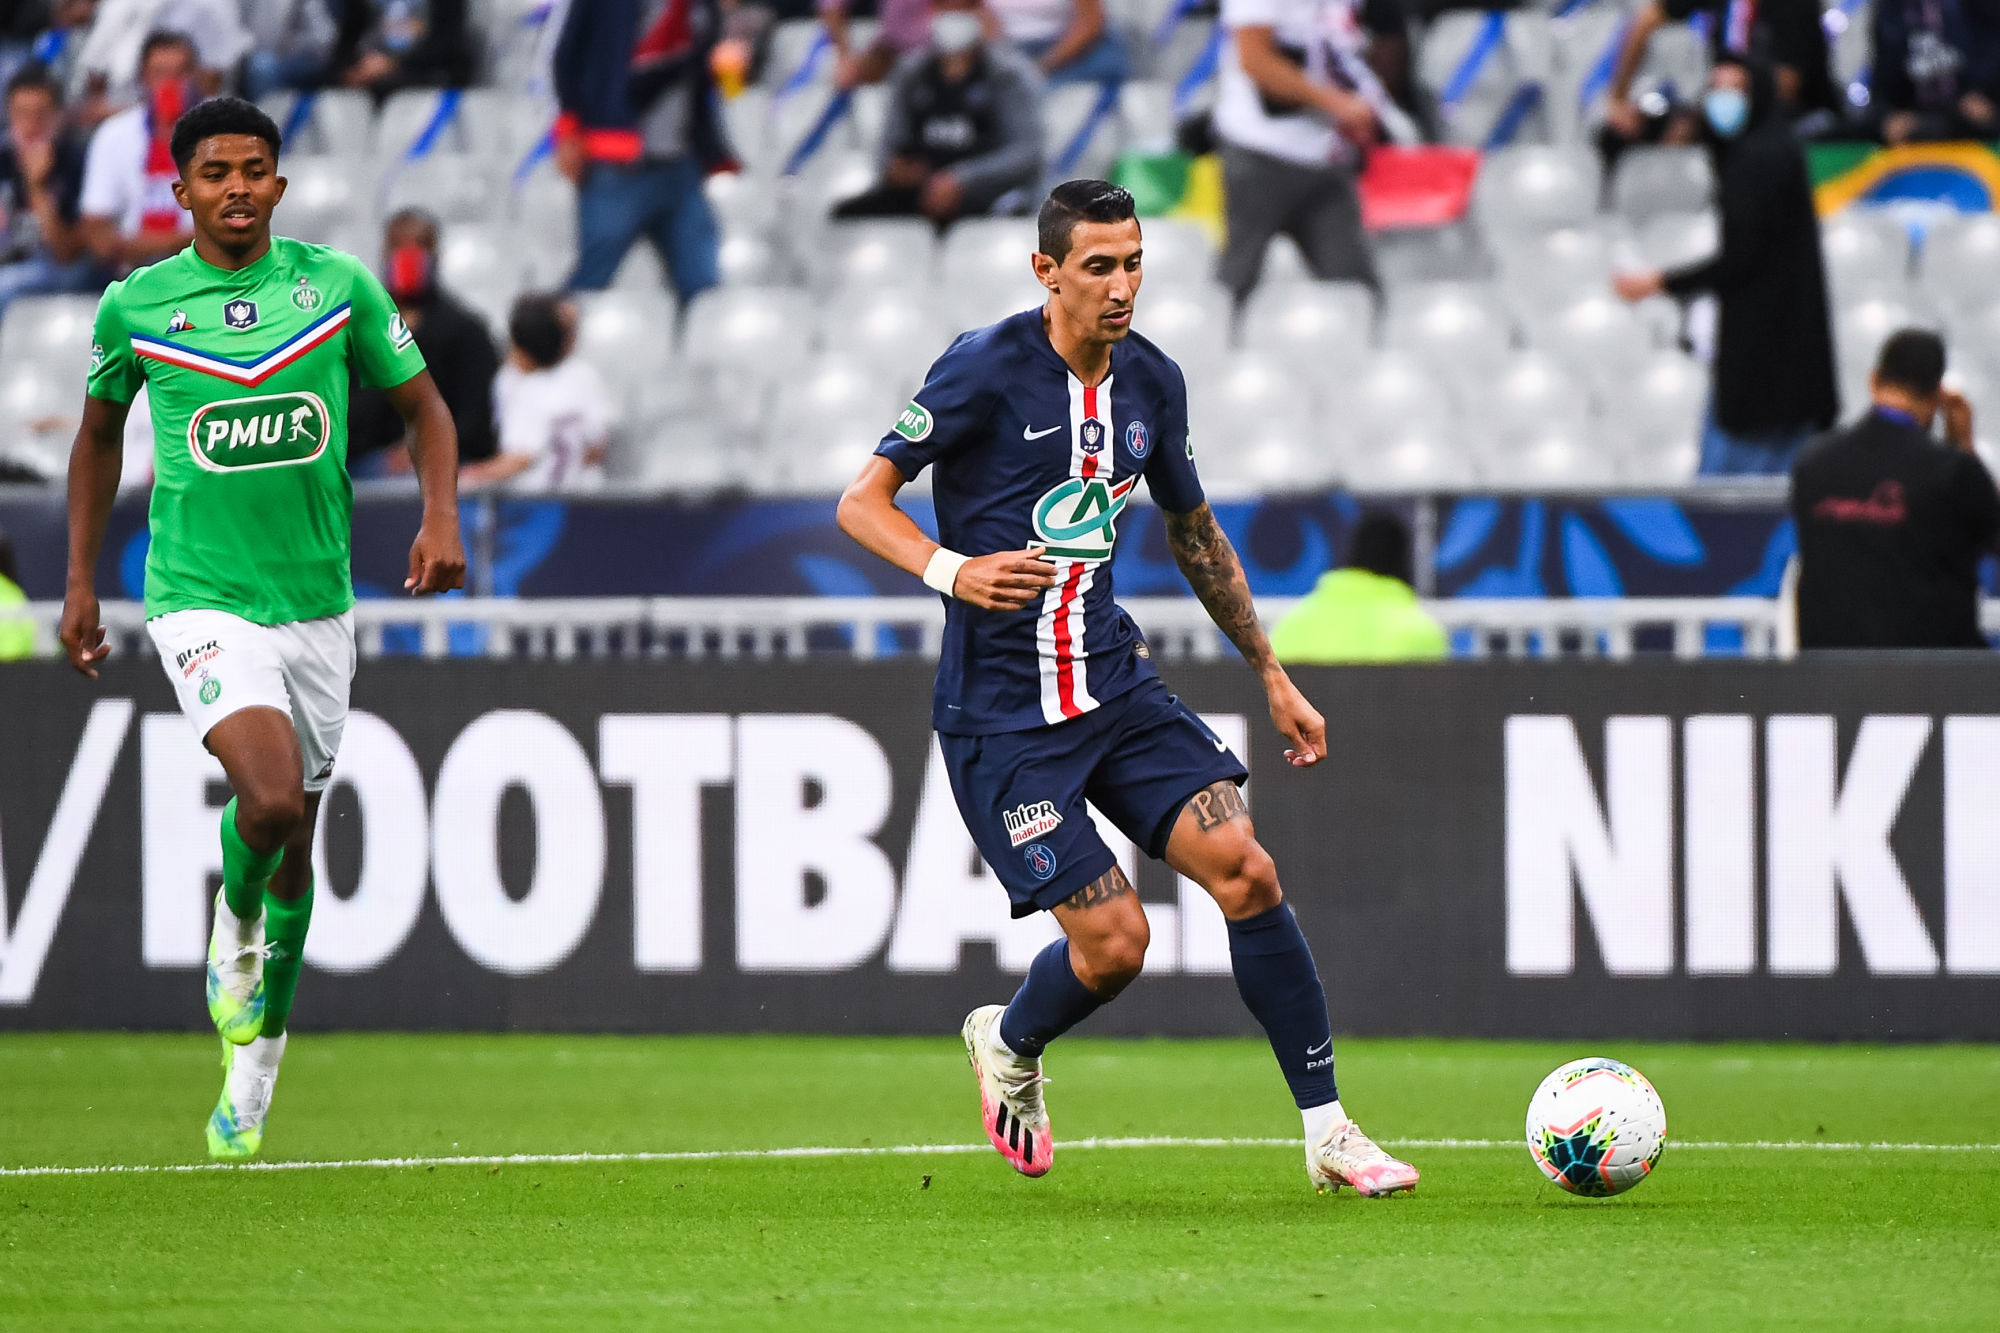 Wesley FOFANA of Saint Etienne and Angel DI MARIA of Paris Saint Germain during the French Cup Final soccer match between Paris Saint Germain and Saint Etienne at Stade de France on July 24, 2020 in Paris, France. (Photo by Baptiste Fernandez/Icon Sport) - Angel DI MARIA - Wesley FOFANA - Stade de France - Paris (France)